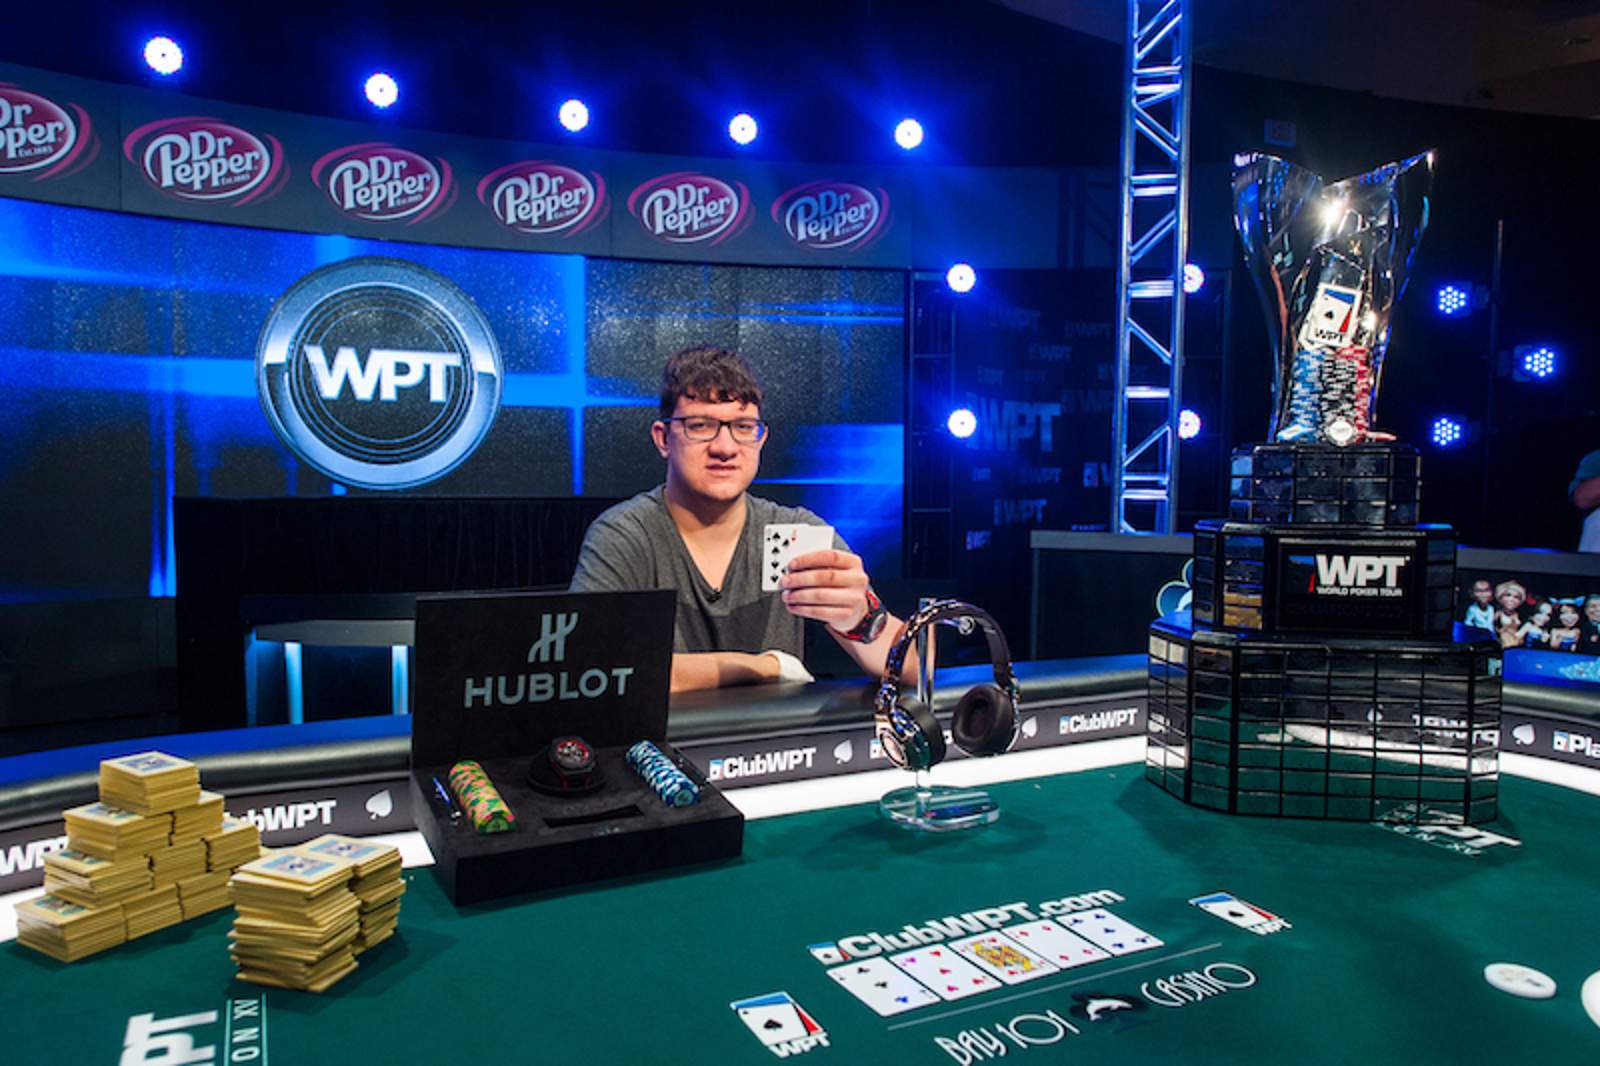 Panzica Shines Bright and Captures Second WPT Title